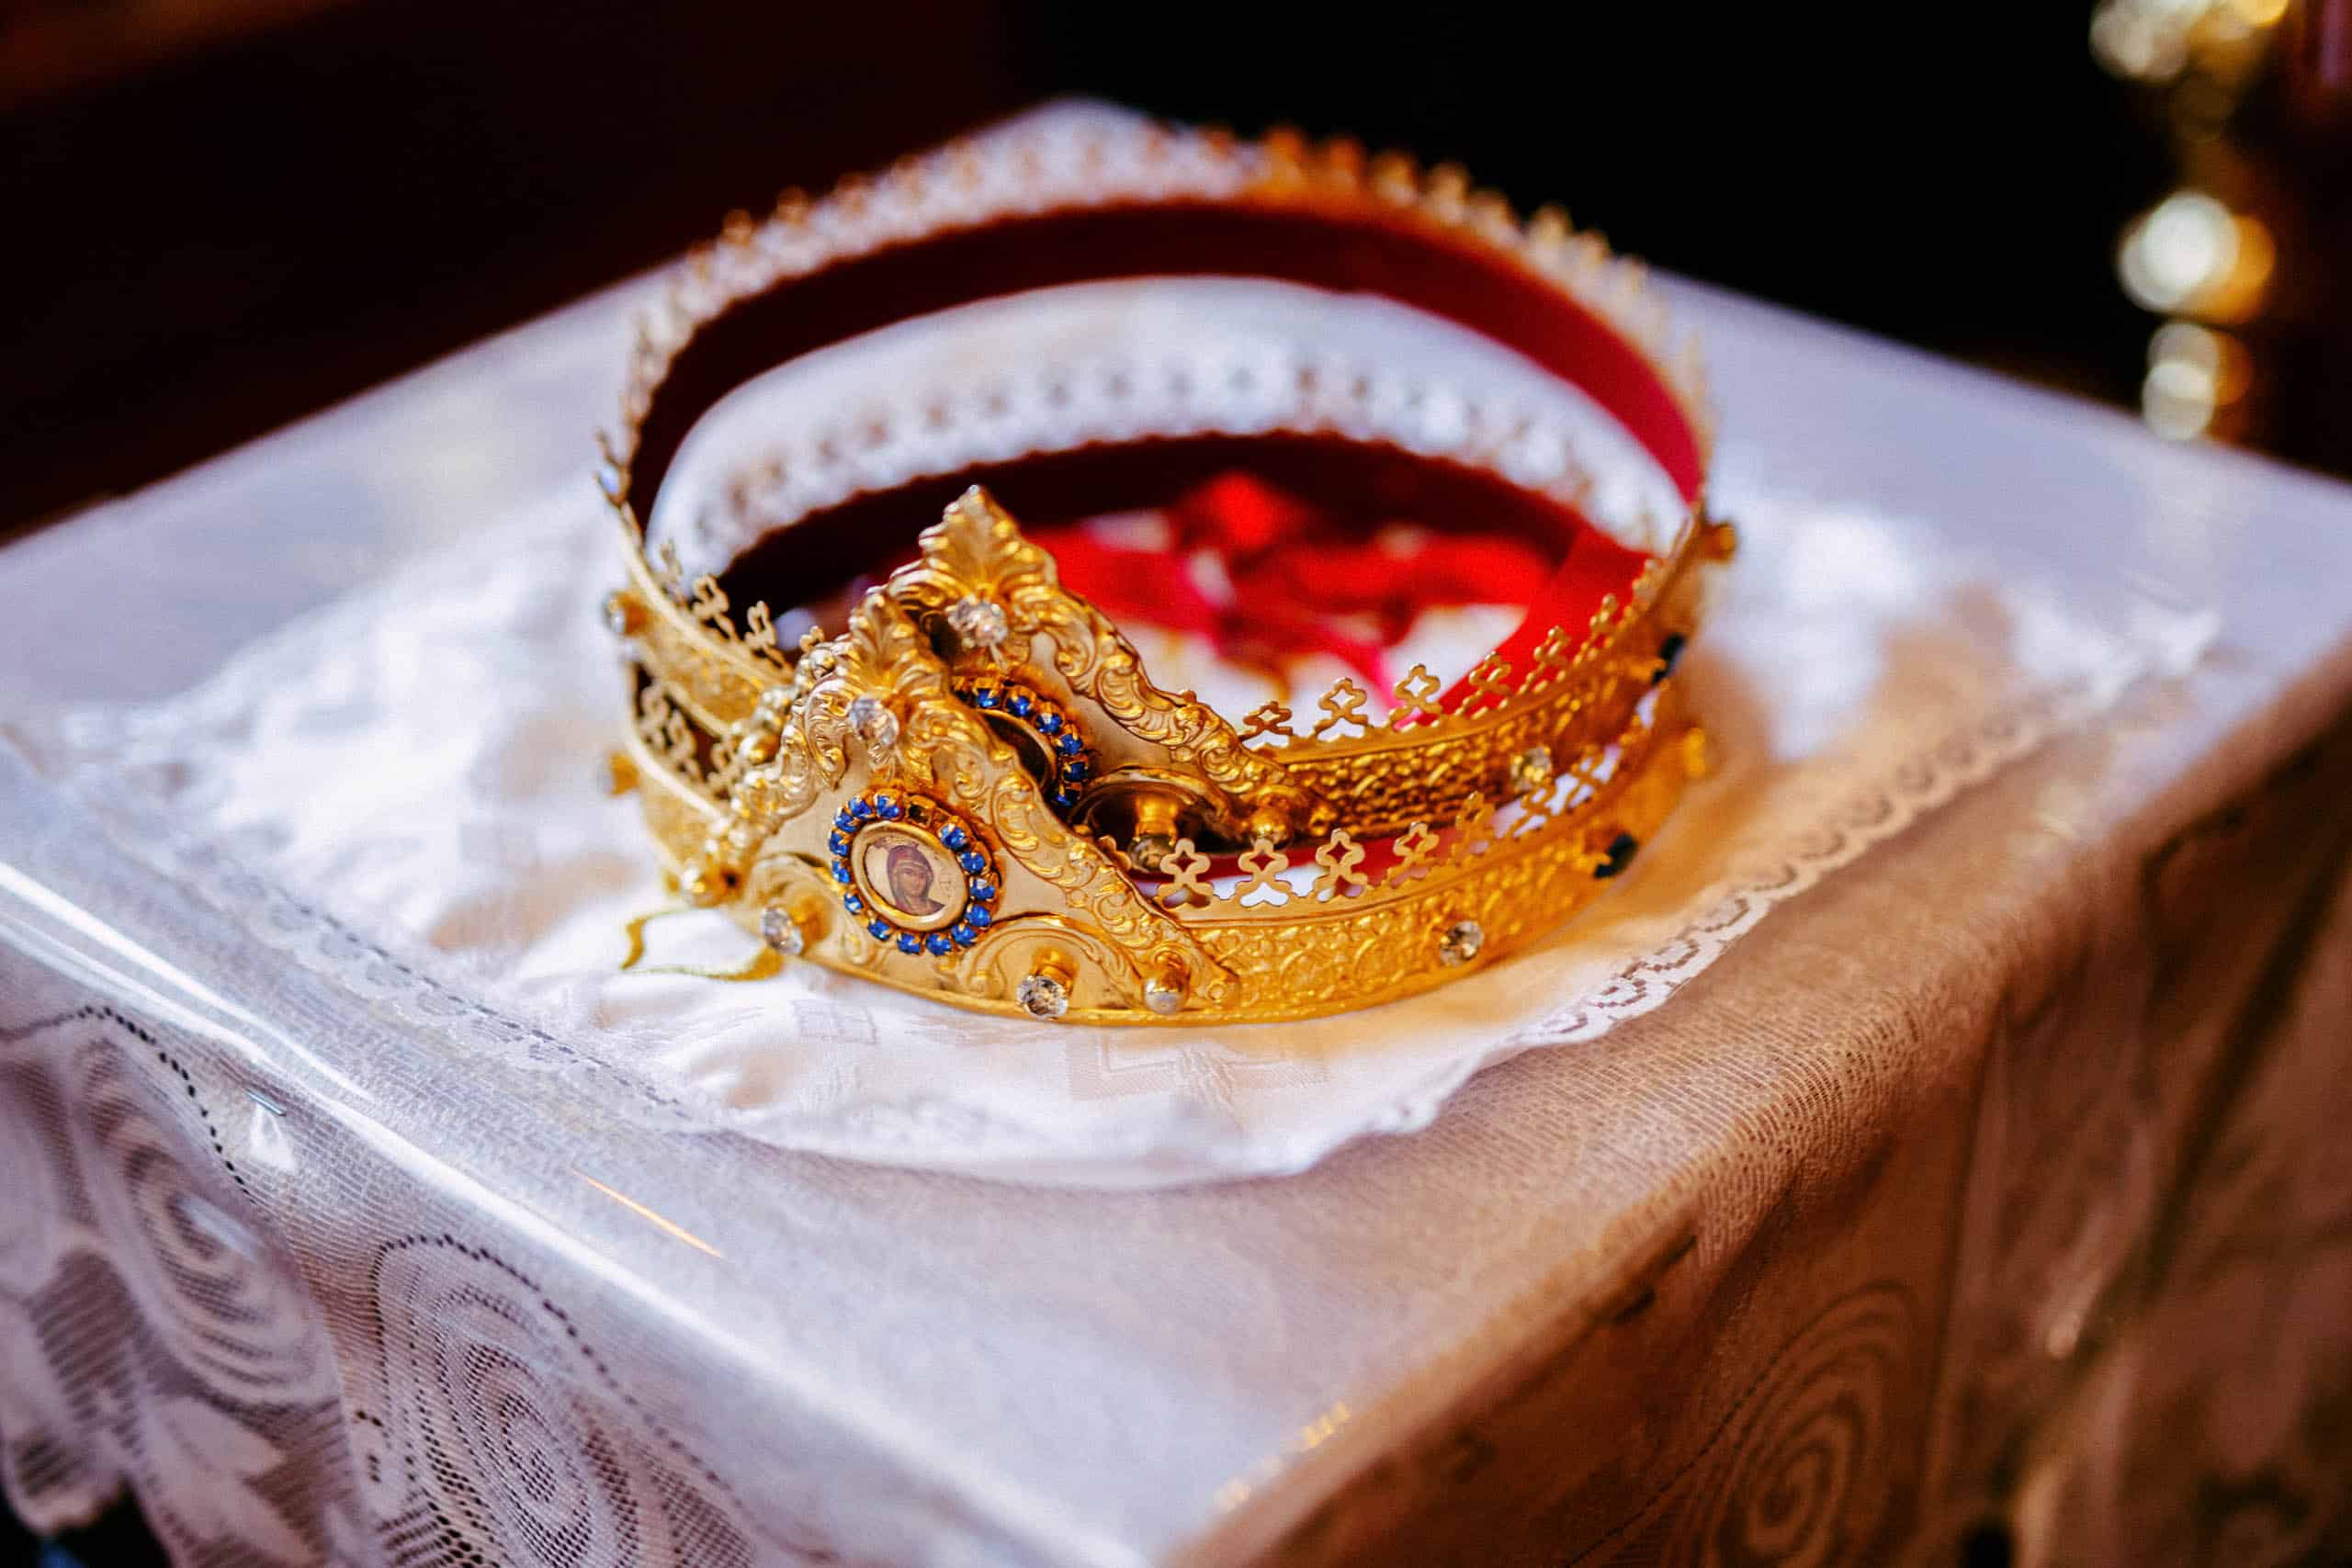 A gold crown with intricate details looks elegant on a table during a Coptic wedding.